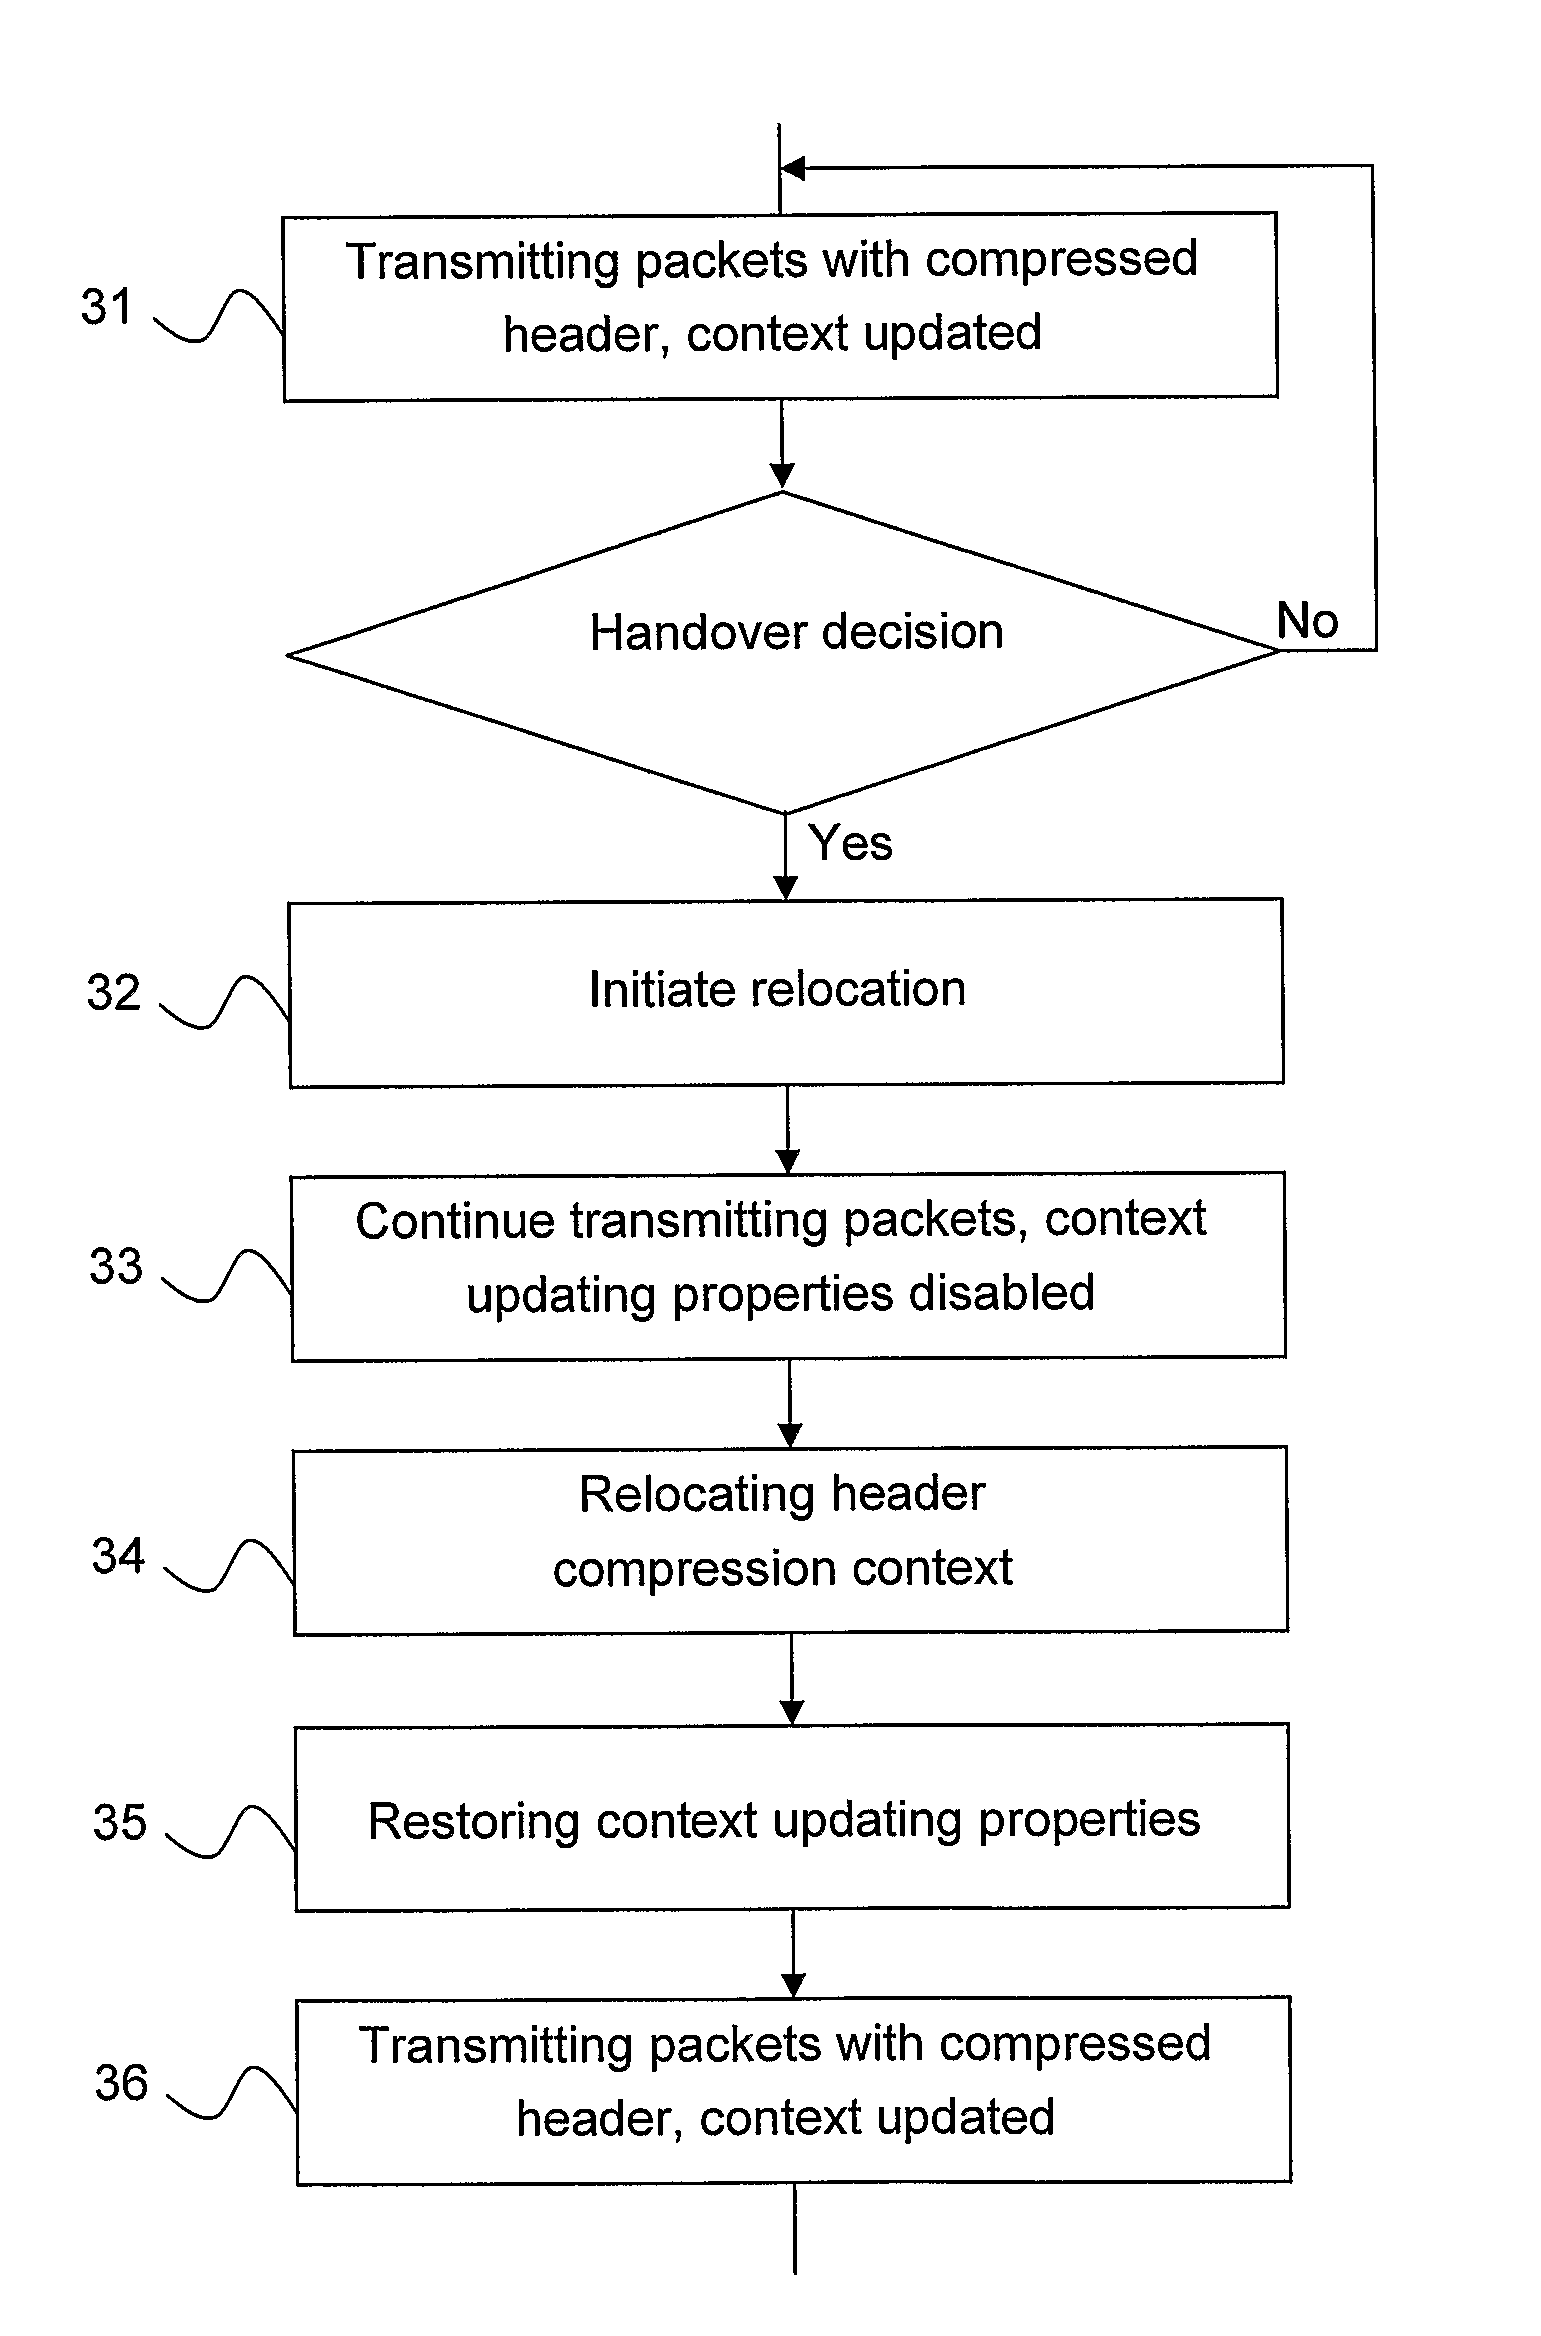 Method and Apparatus for Relocating a Header Compression Context in a Wireless Communication System